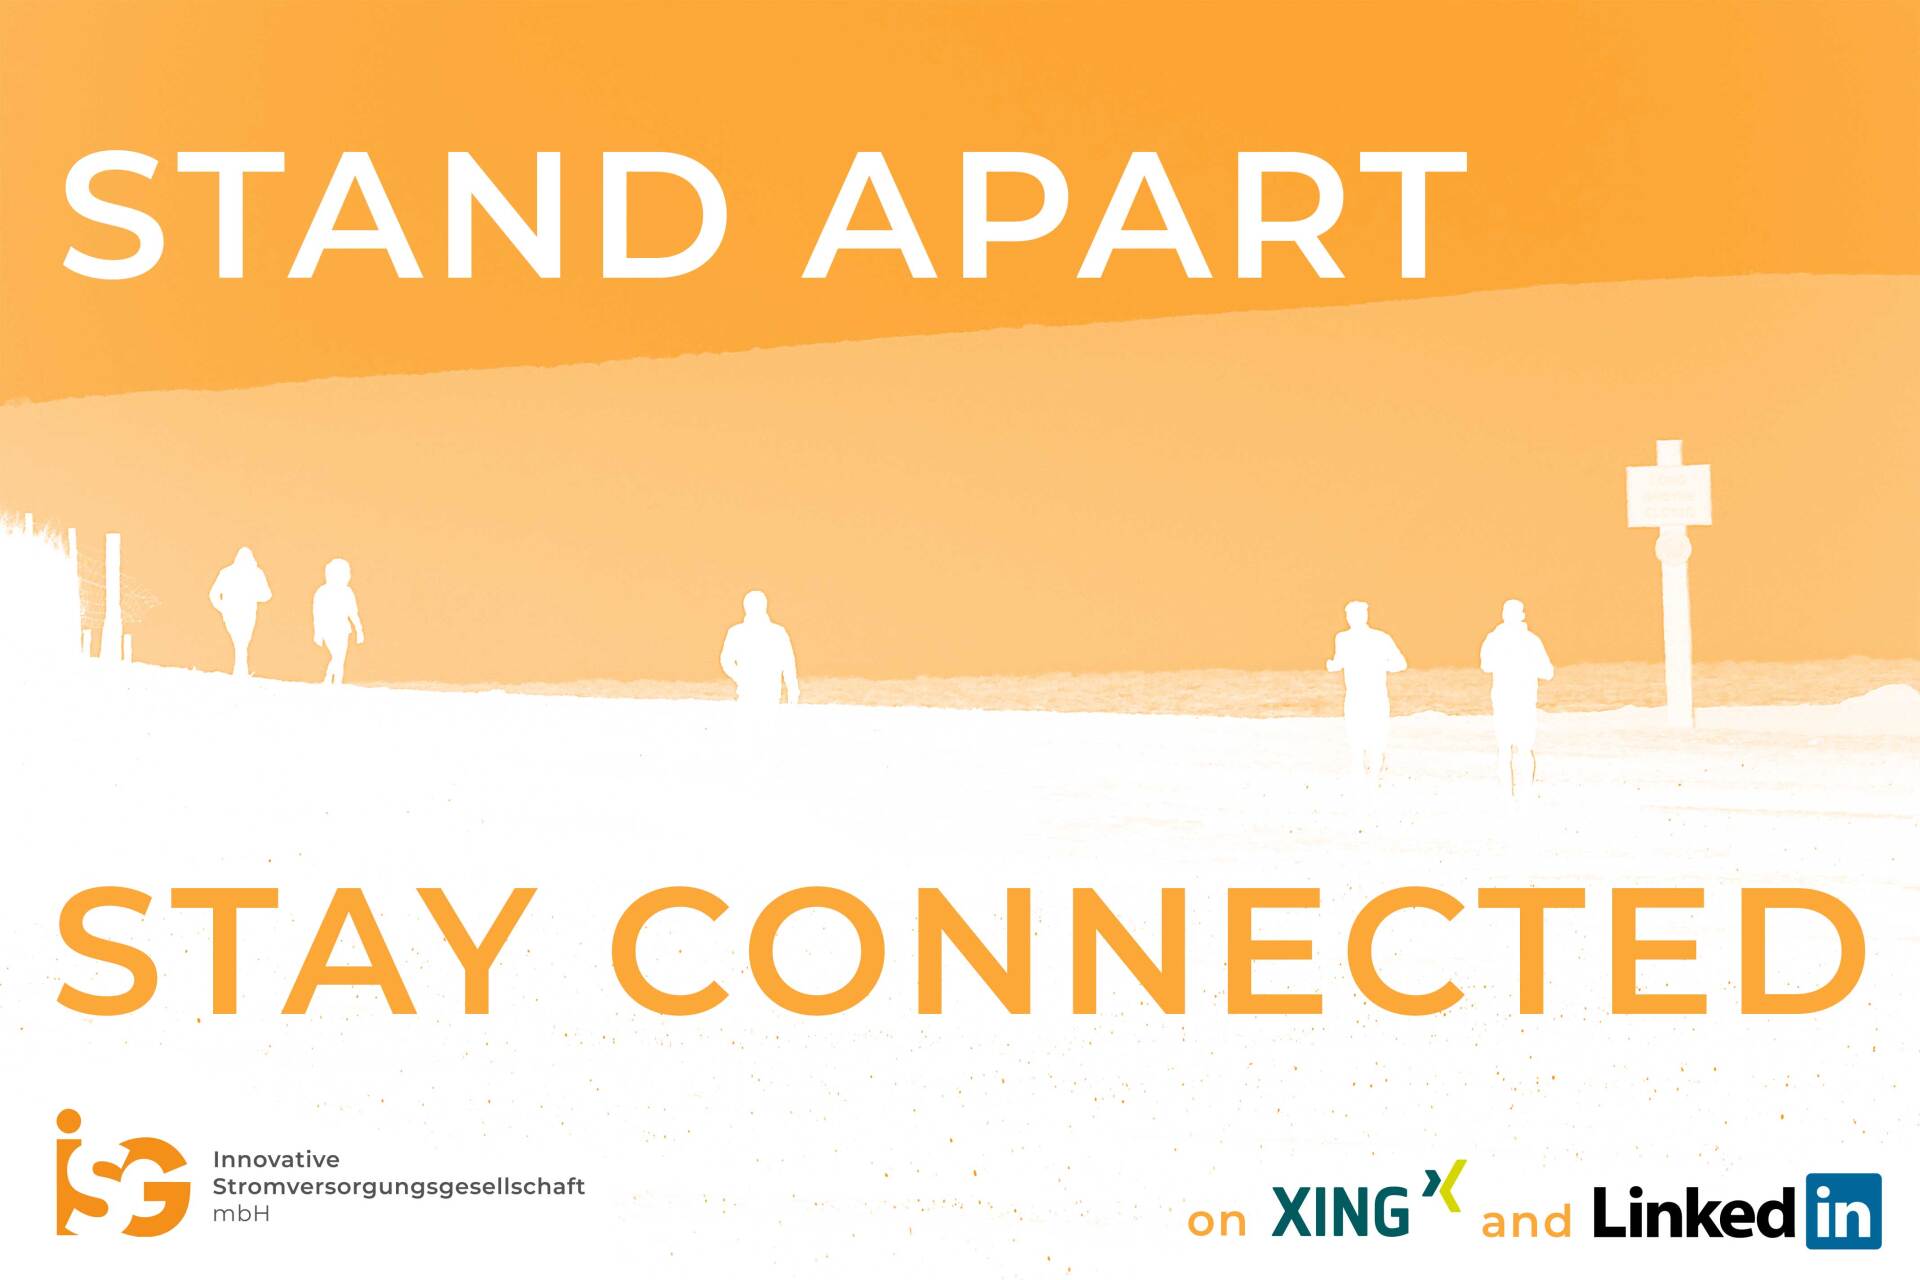 ISG mbH - Stay connected on Xing and LinkedIn